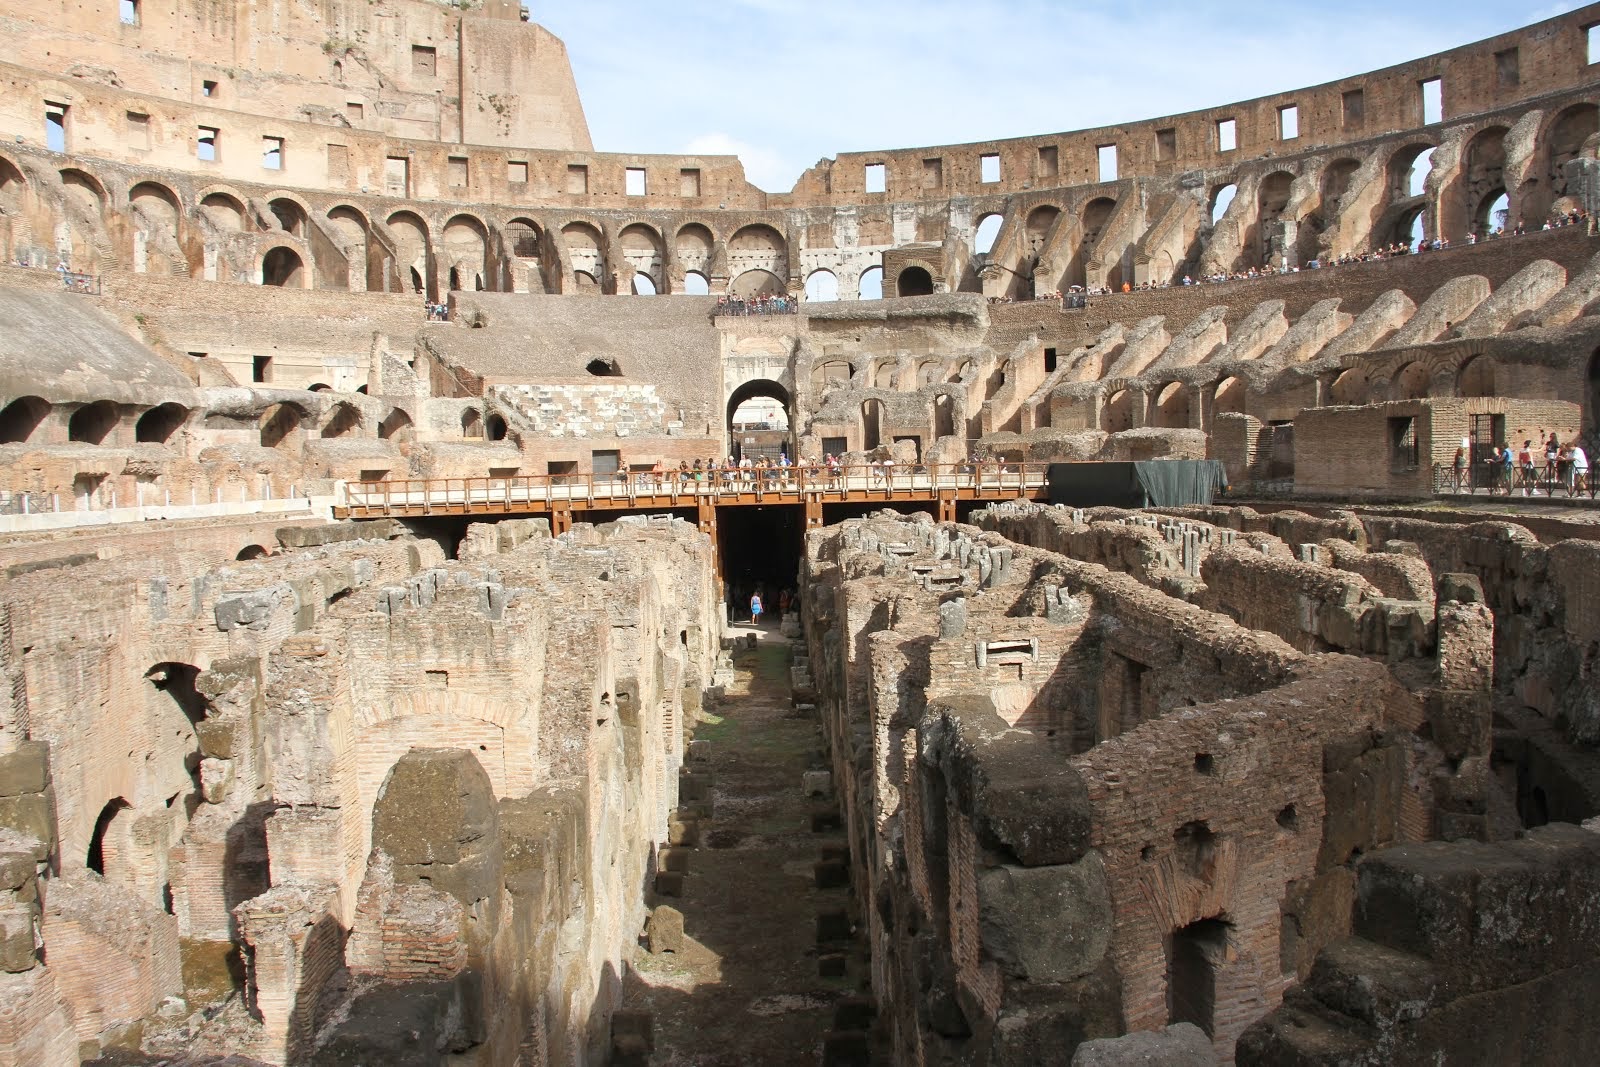 Exploring Inside the Colosseum in Rome